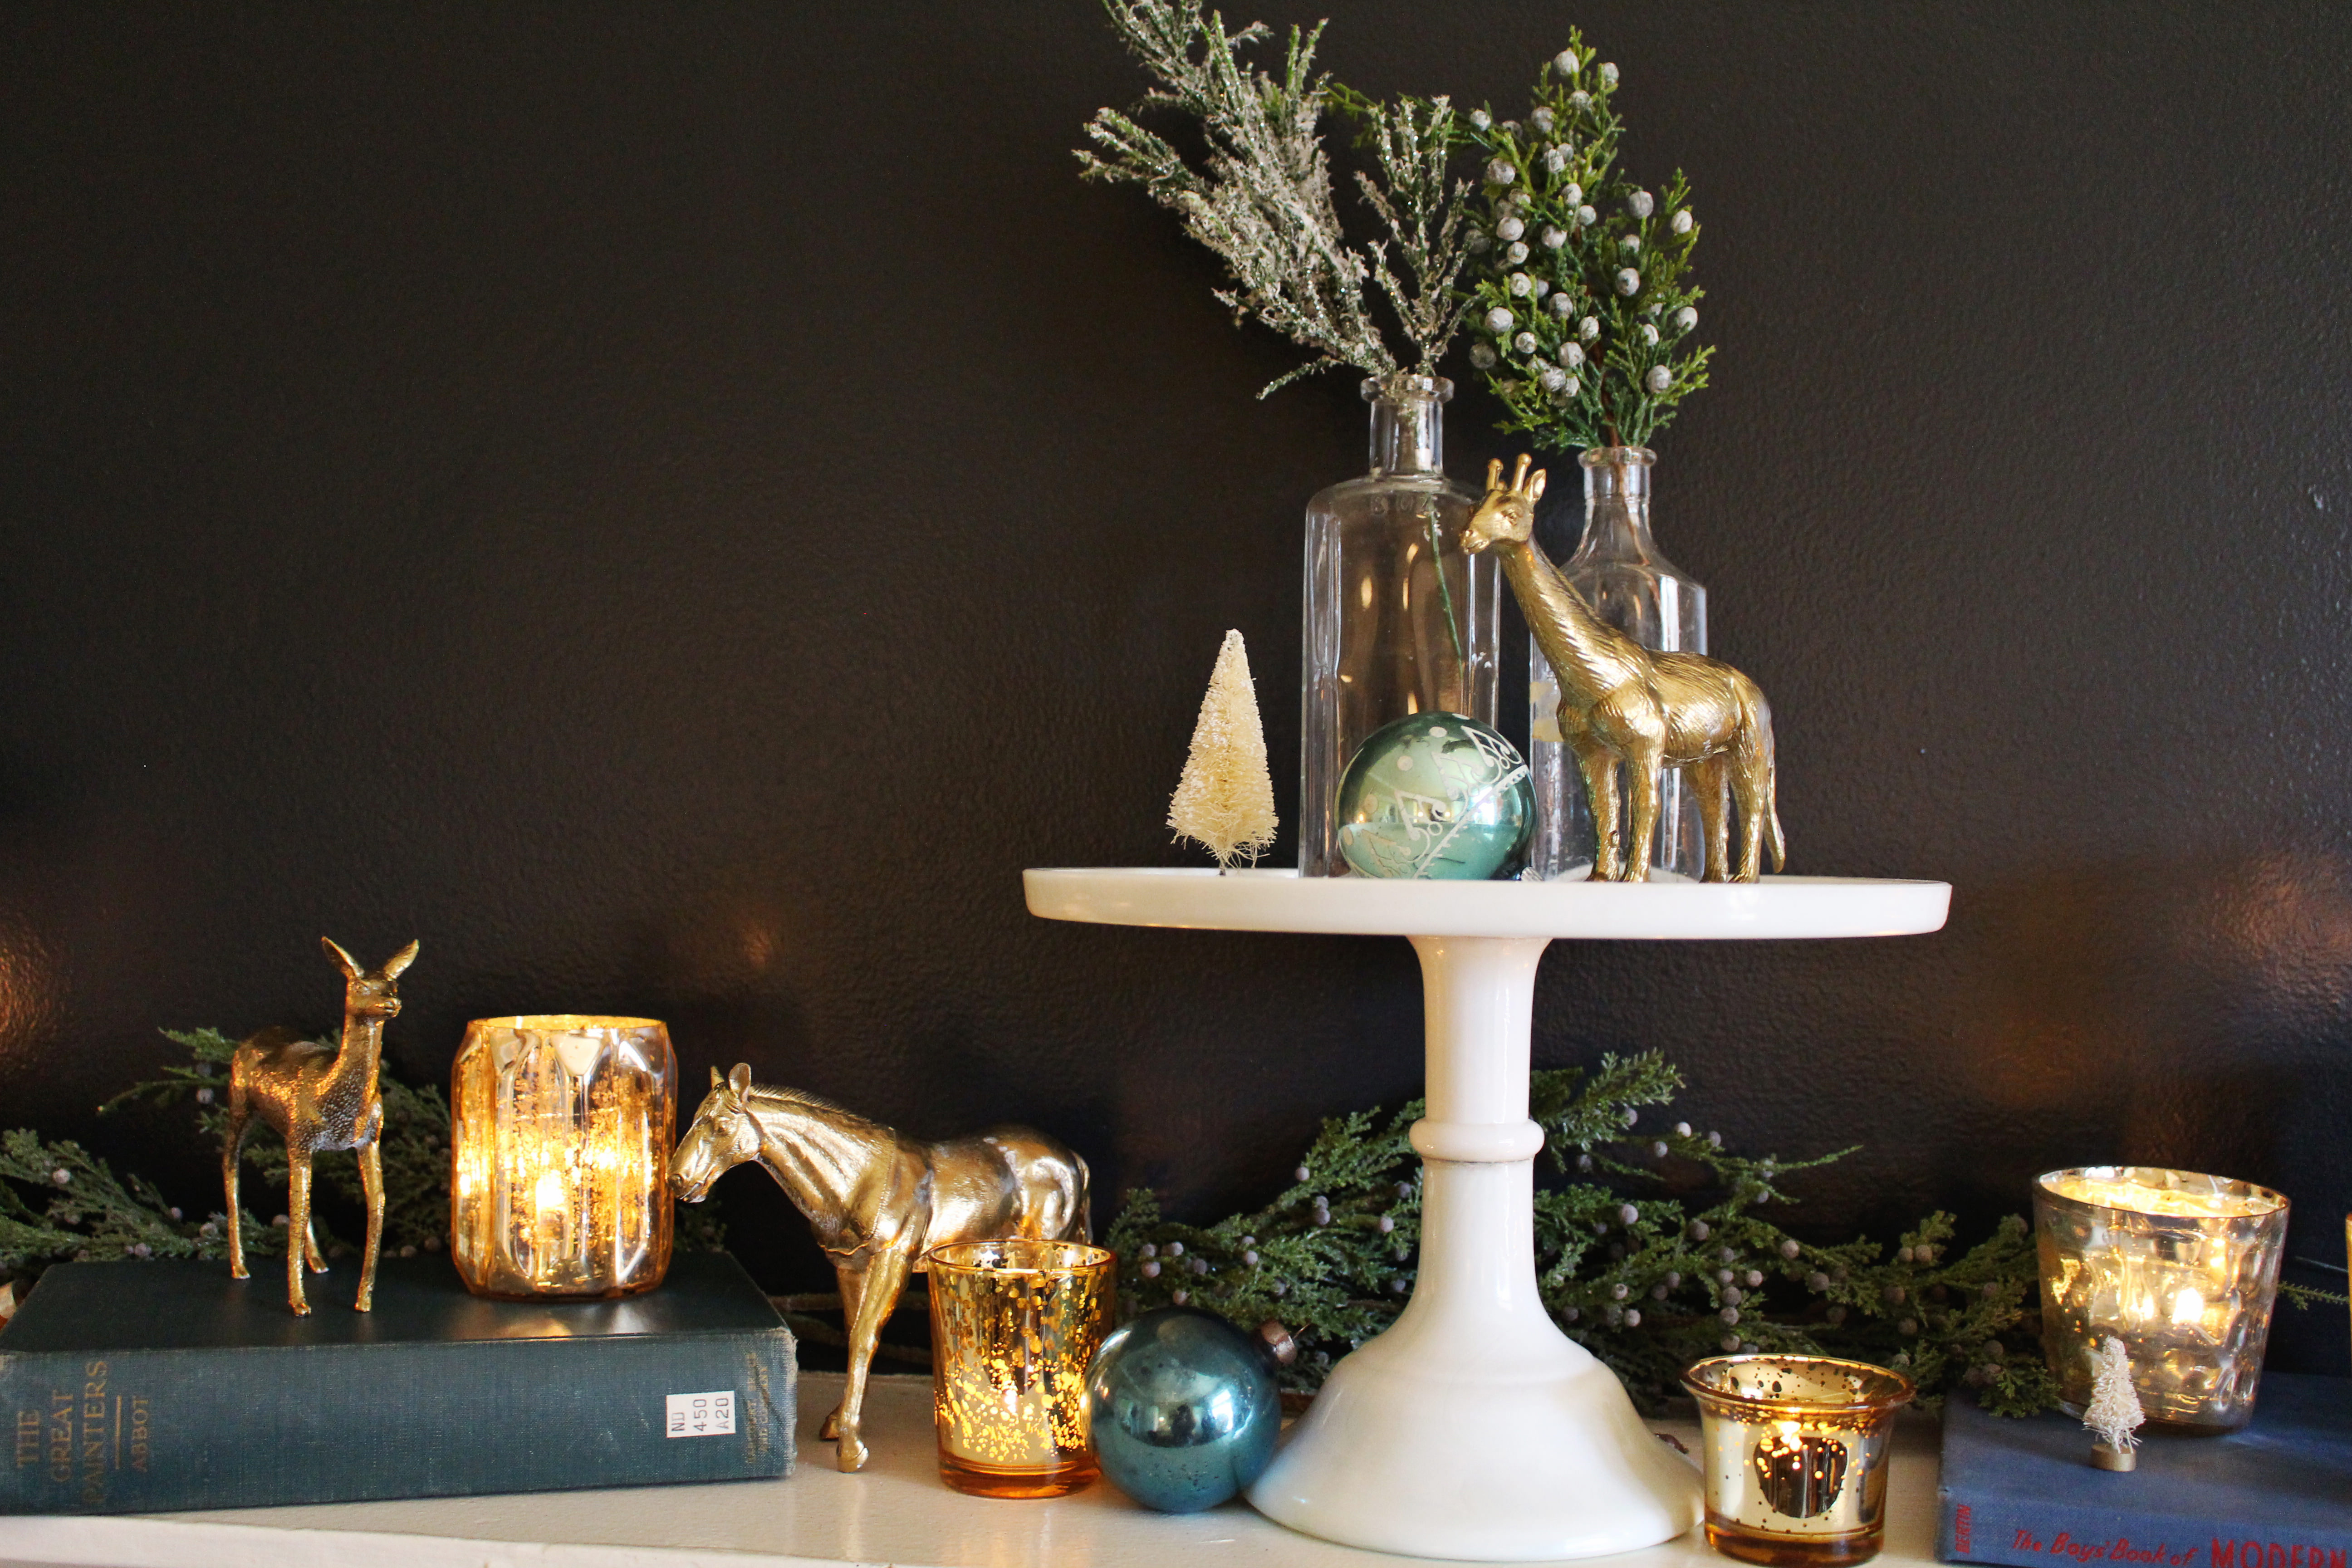 DIY gold animals are an unexpected holiday mantle details